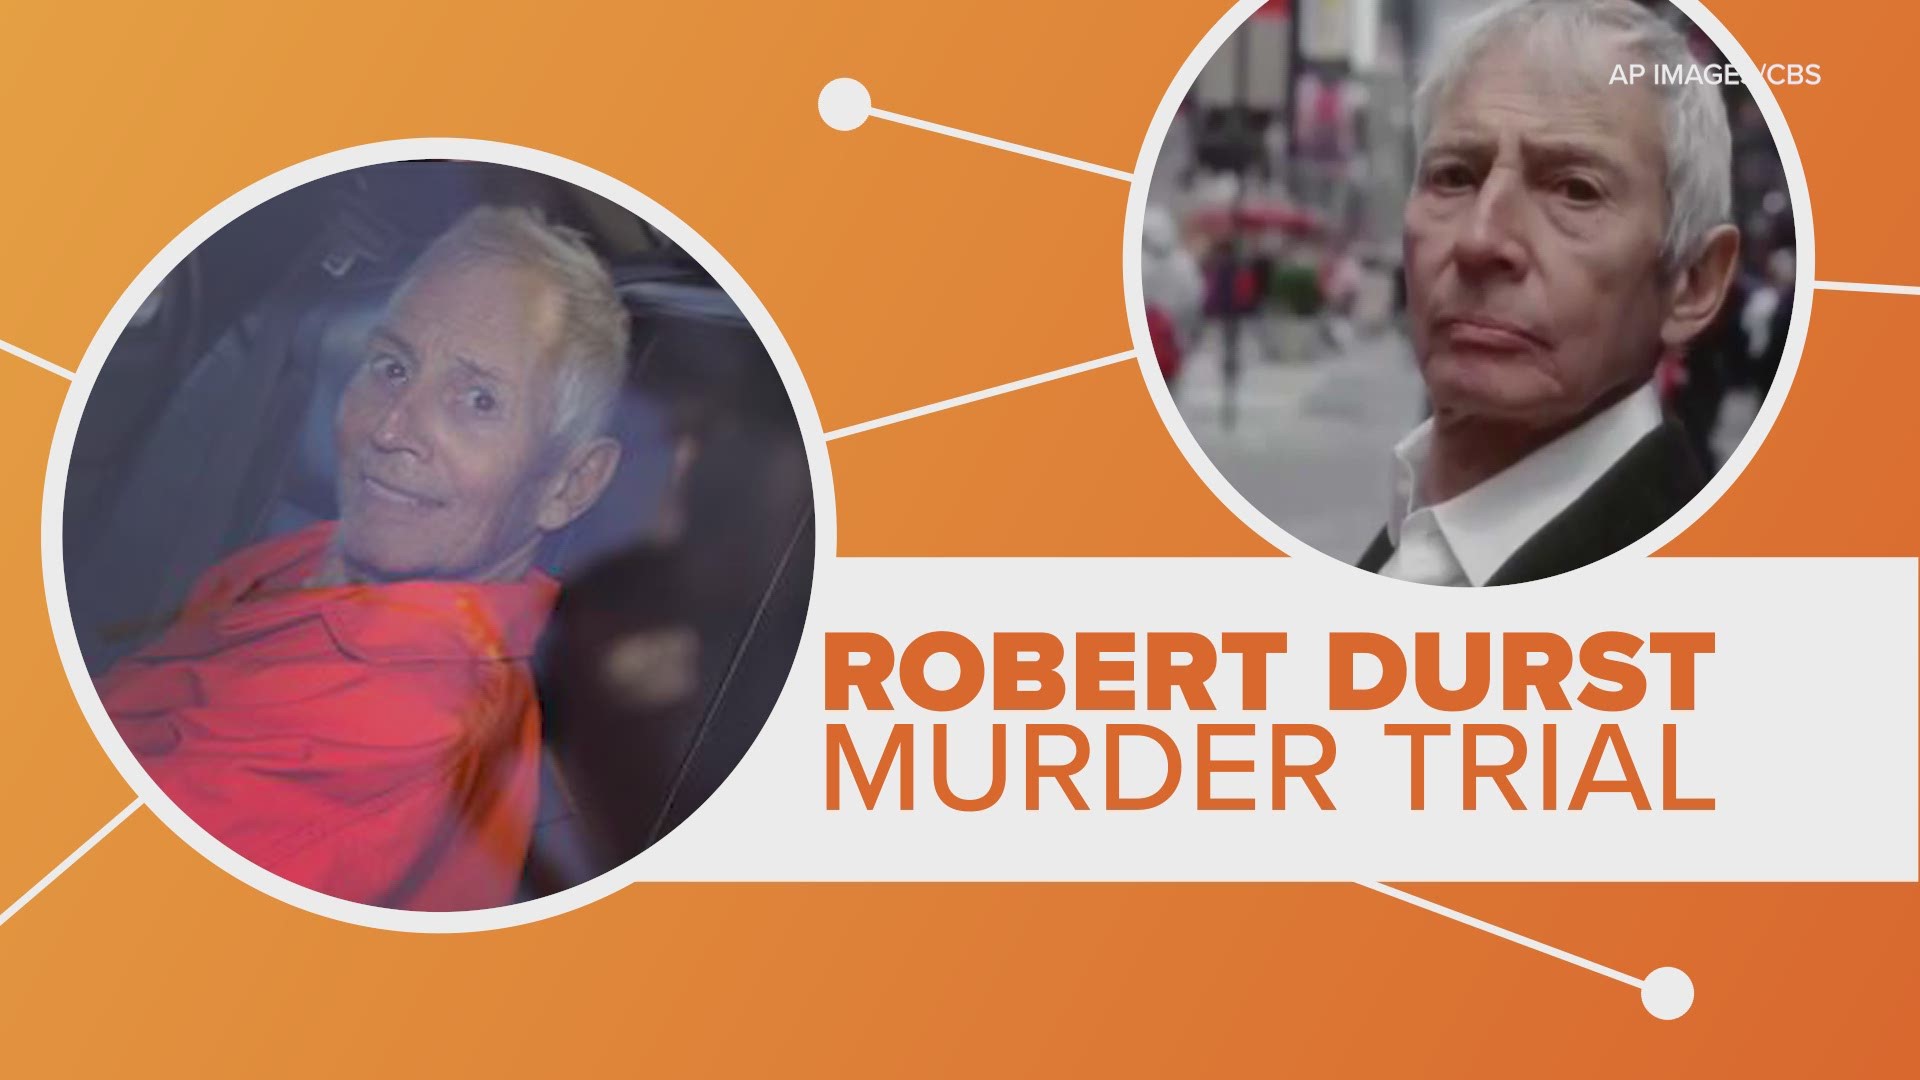 Robert Durst is charged with killing a close friend in California, and an infamous murder case in Galveston, Texas could play a key role.